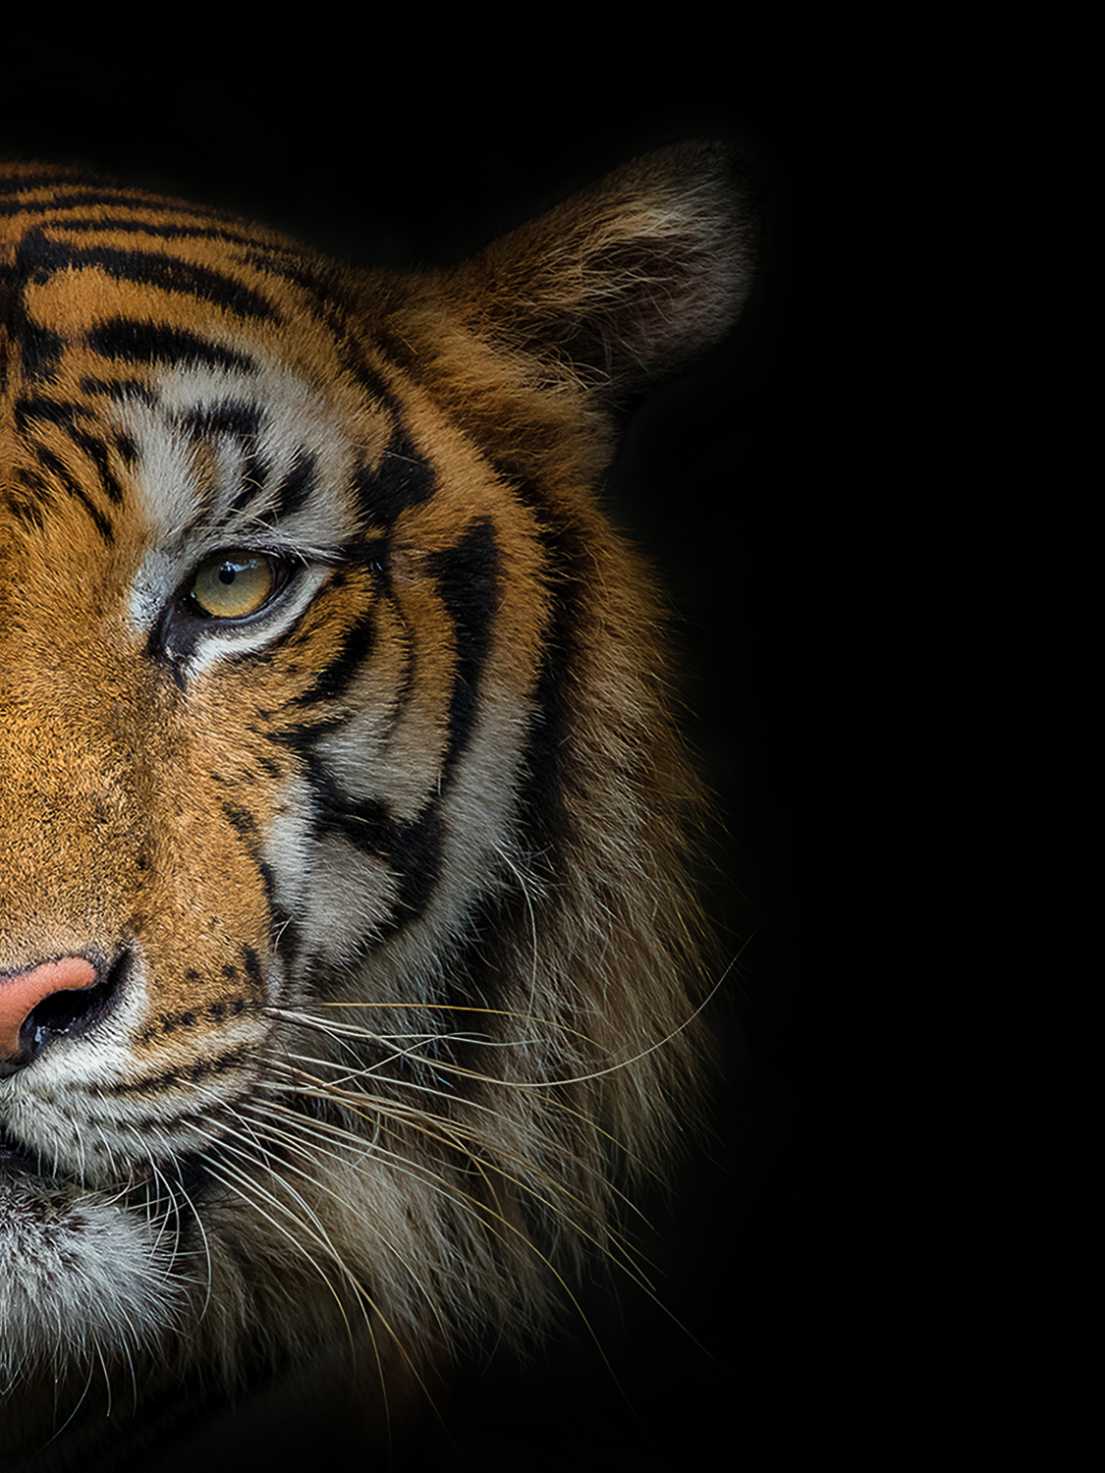 Tiger Face Photography Print - ArtSmiley